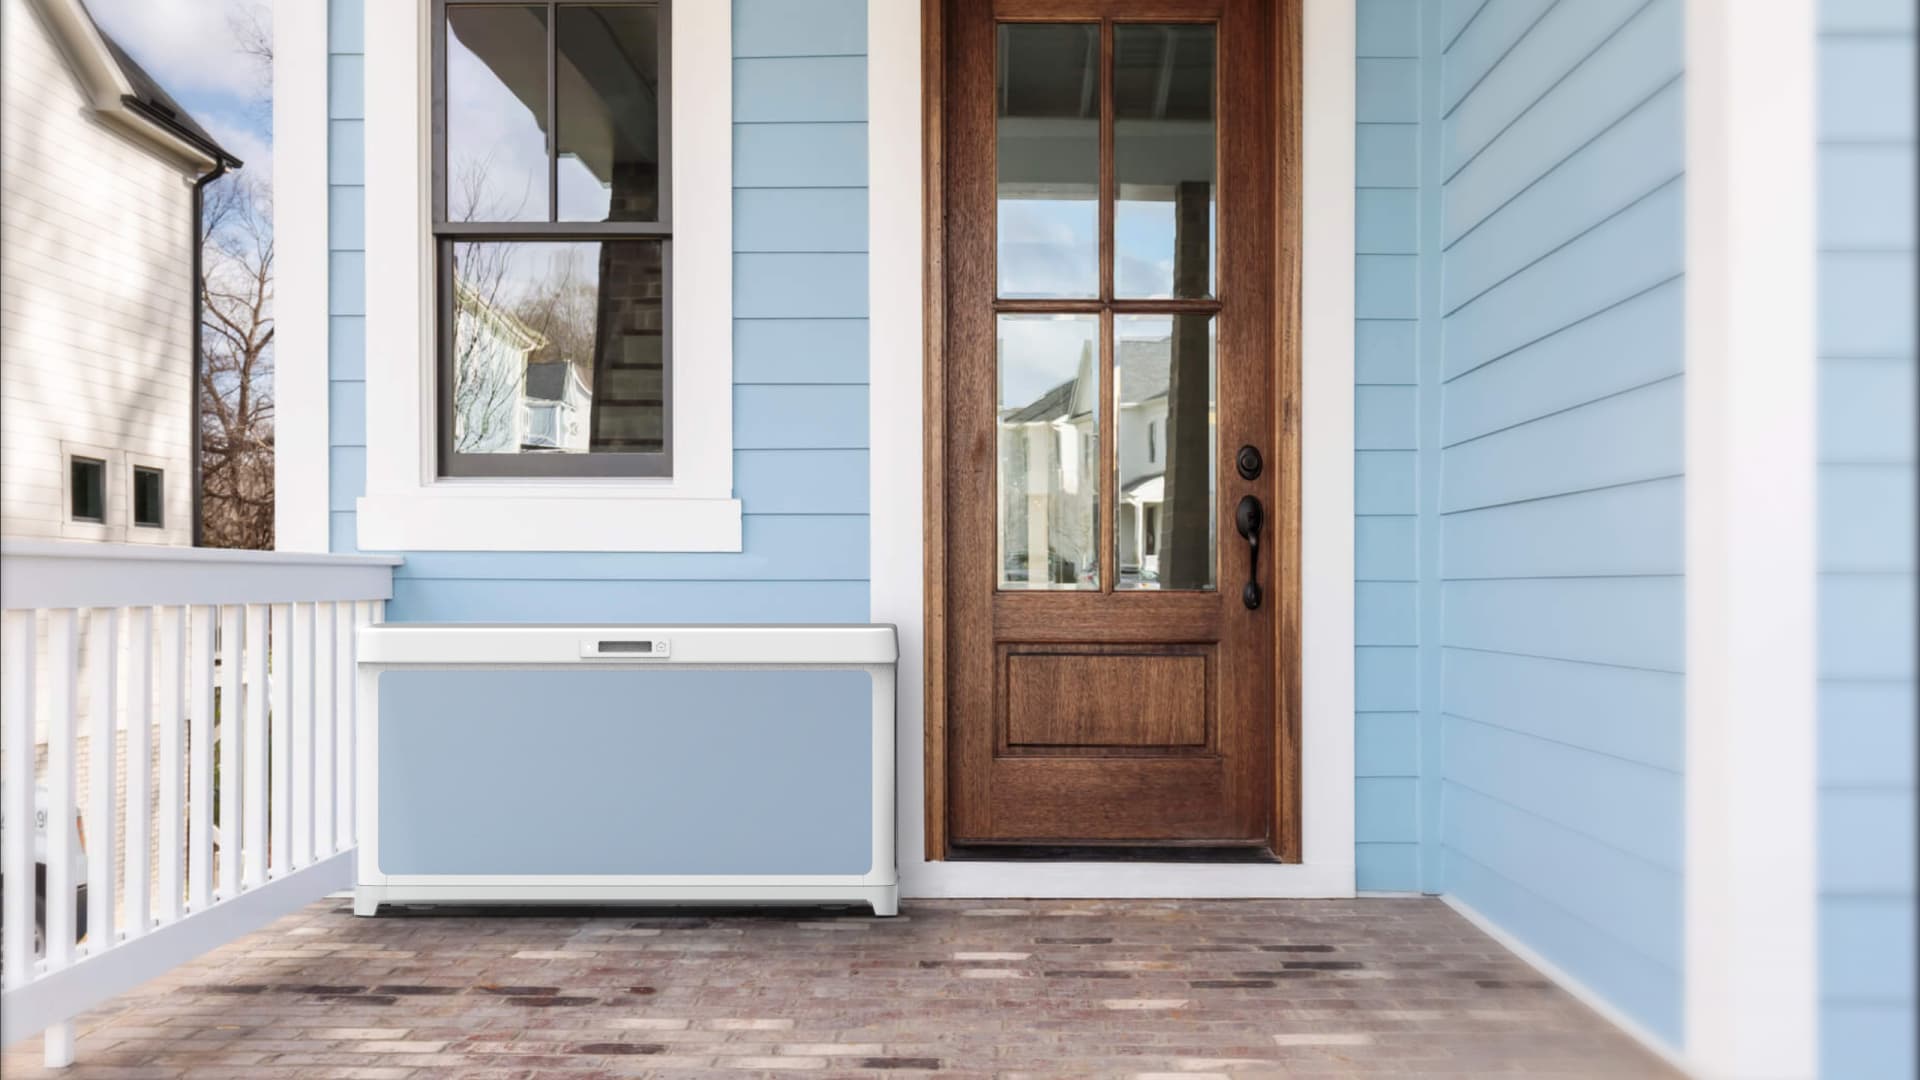 Walmart will test grocery deliveries to a HomeValet, a smart cooler that's placed outside of customers' homes.